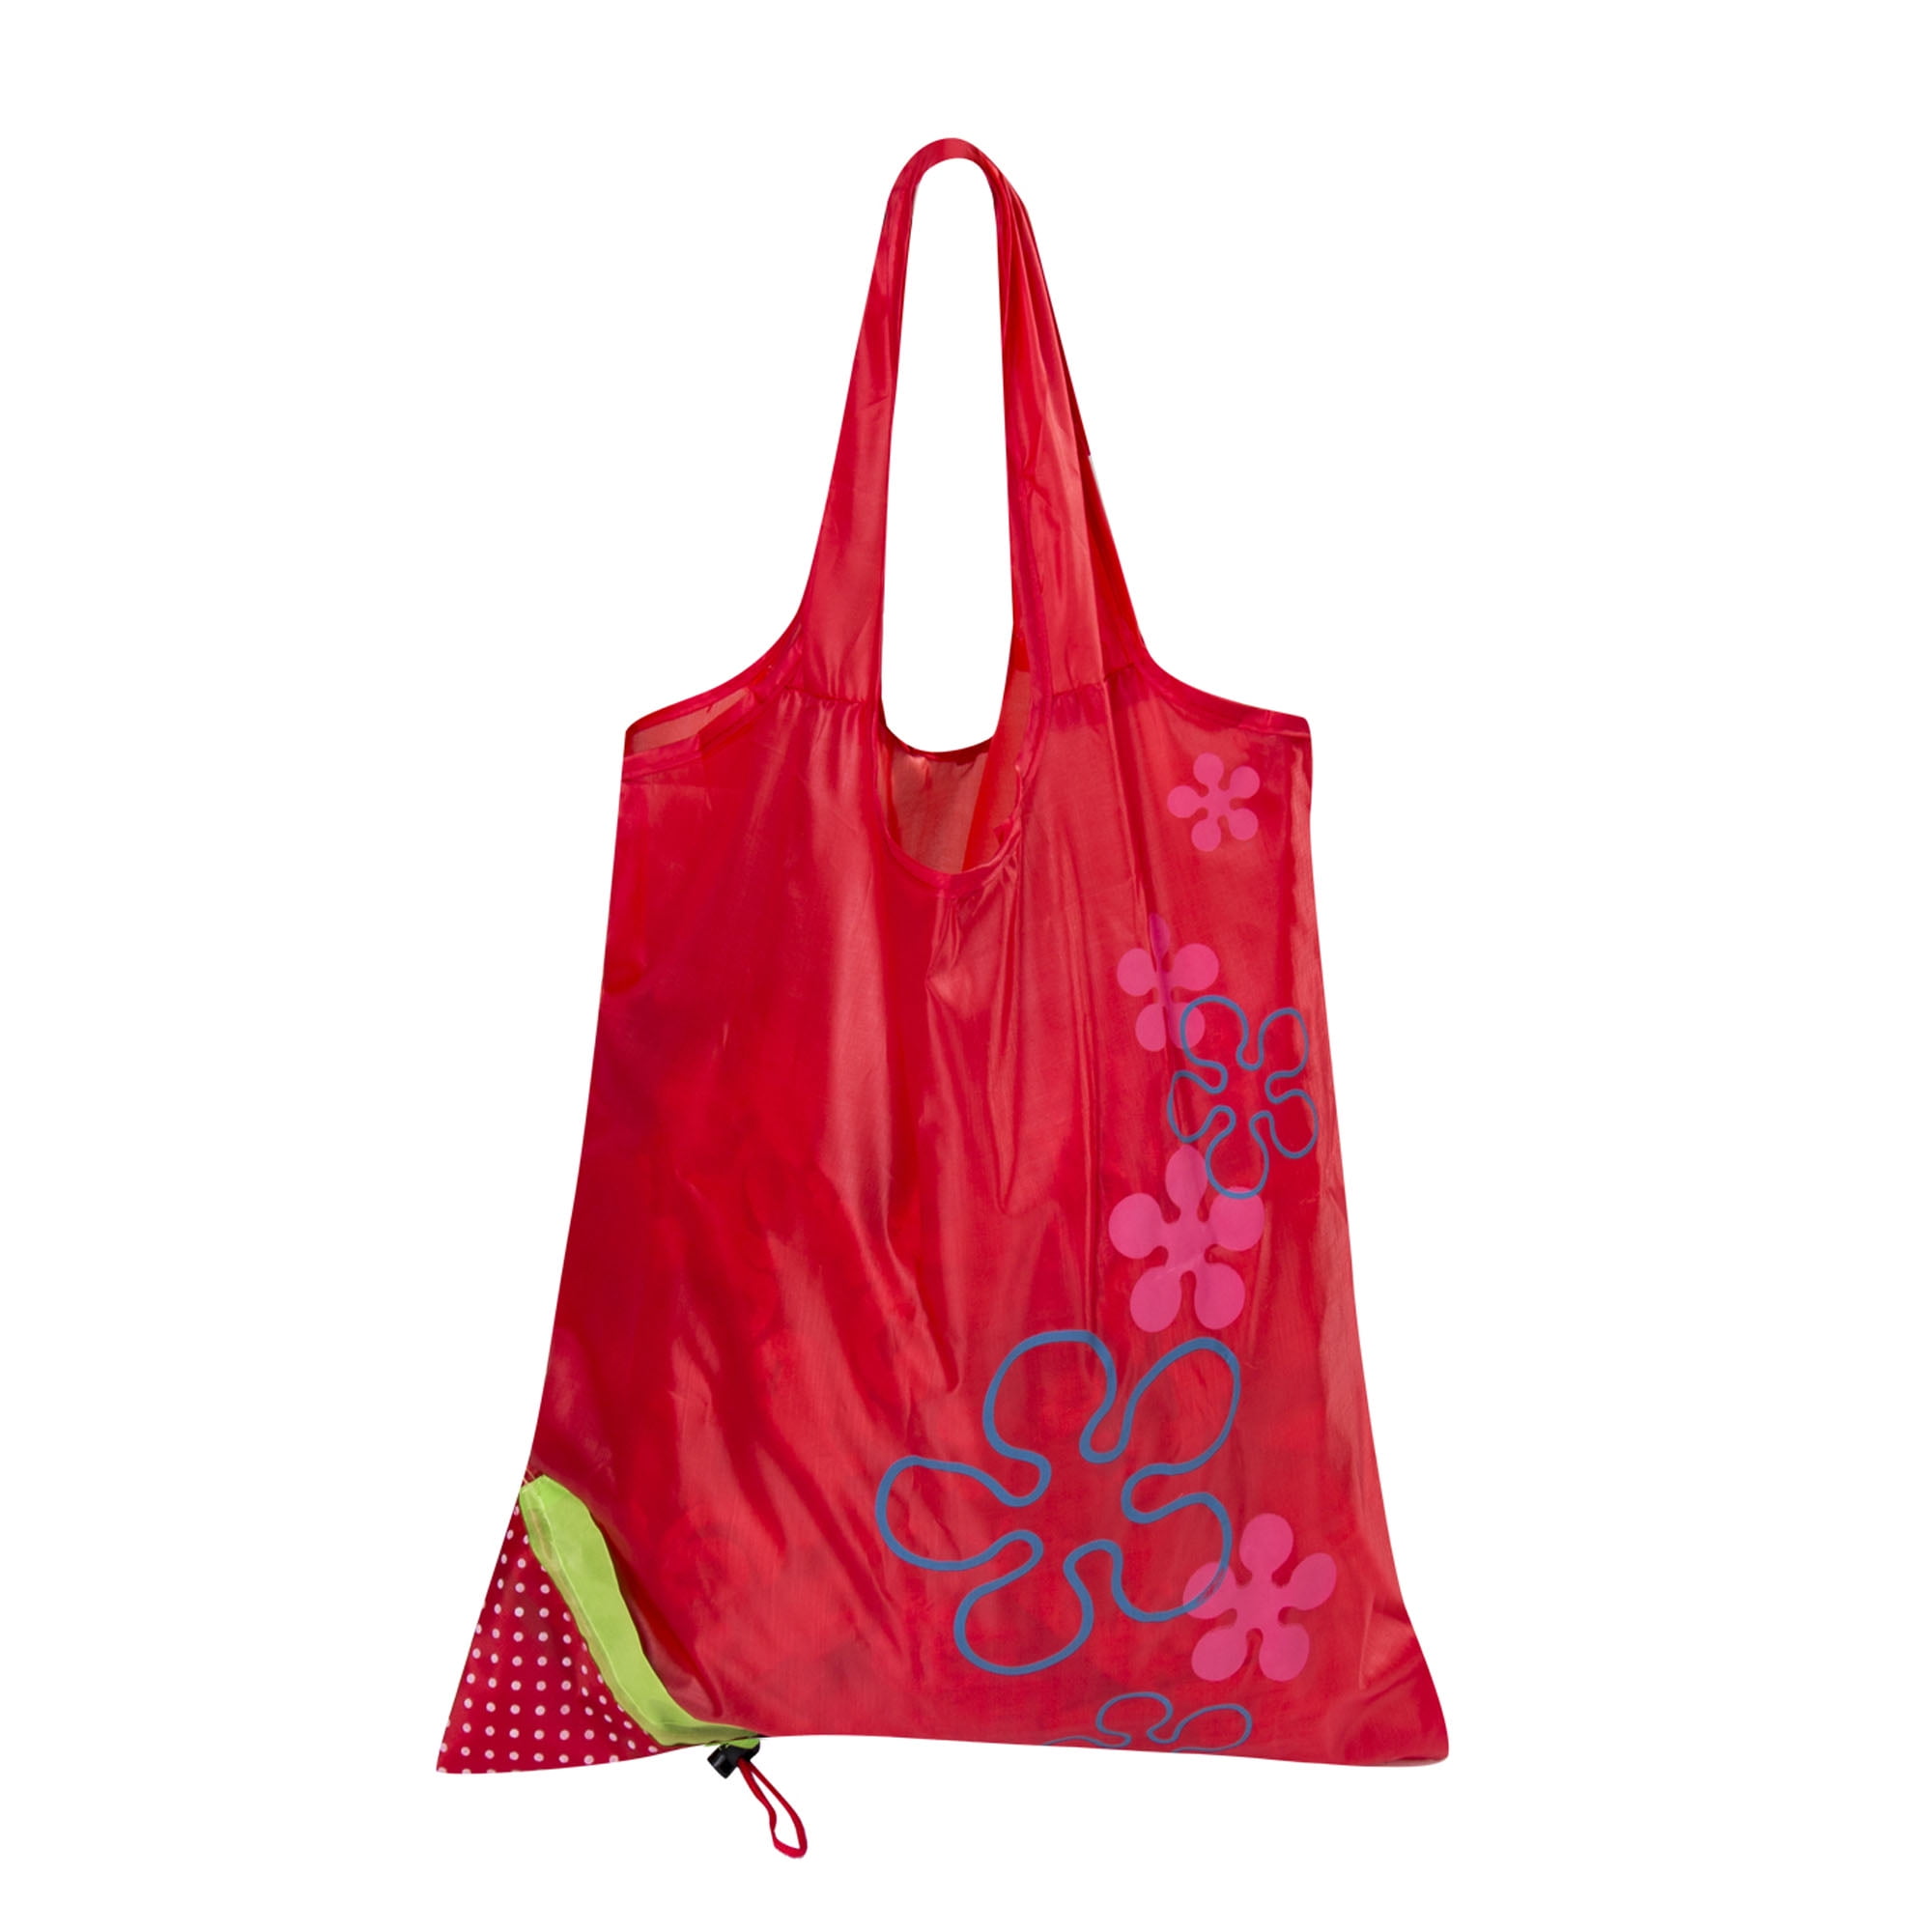 Strawberry Bag - Grocery, Reusable, Eco, Canvas Tote Bag with Zipper,  Large, Fabric Shoulder Bag